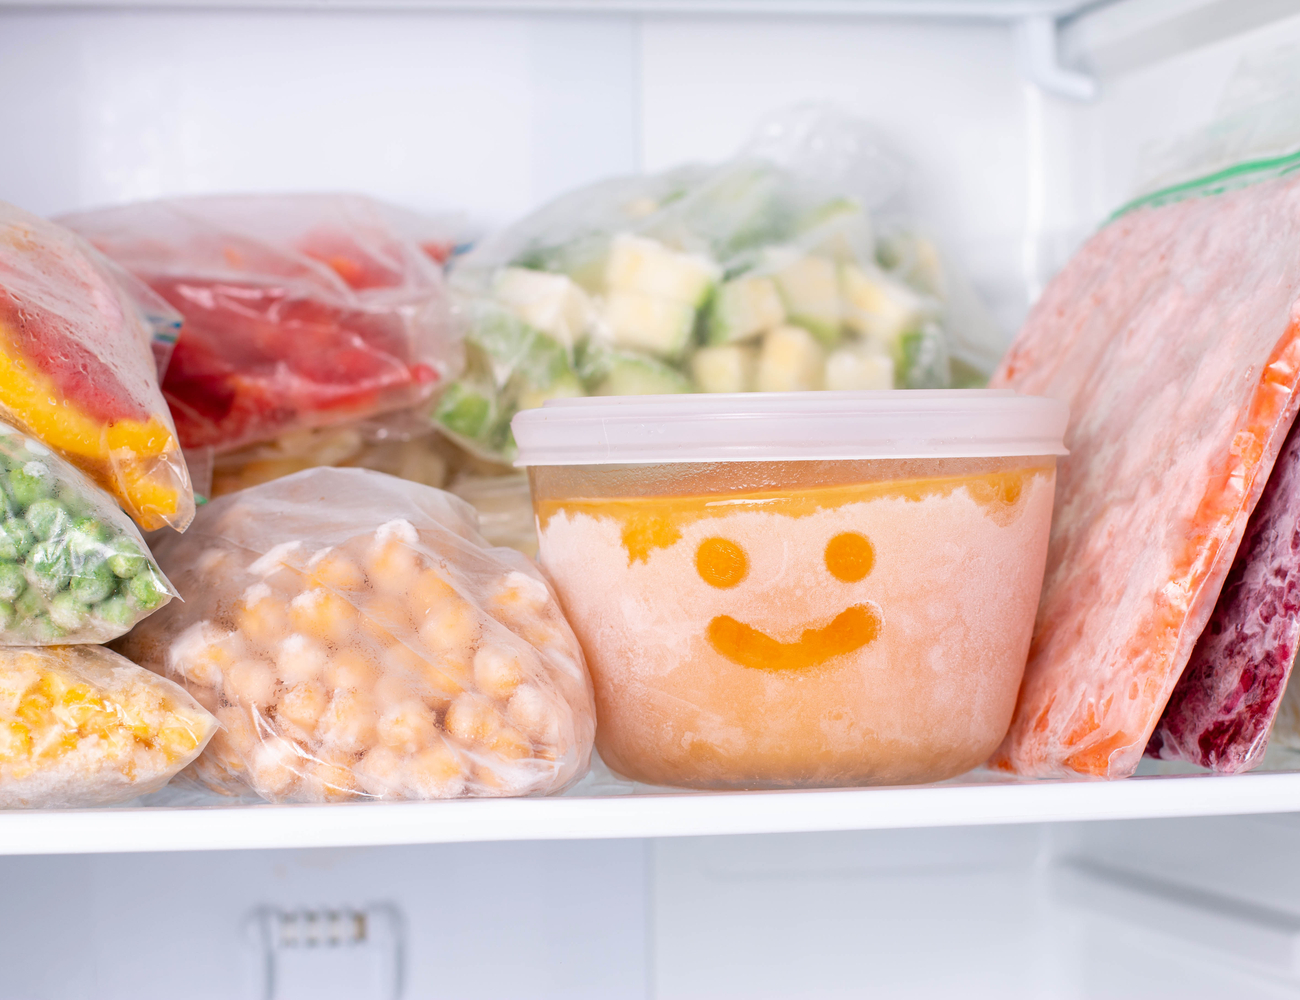 meals that freeze well: a smiley-face drawn on a freezer dinner